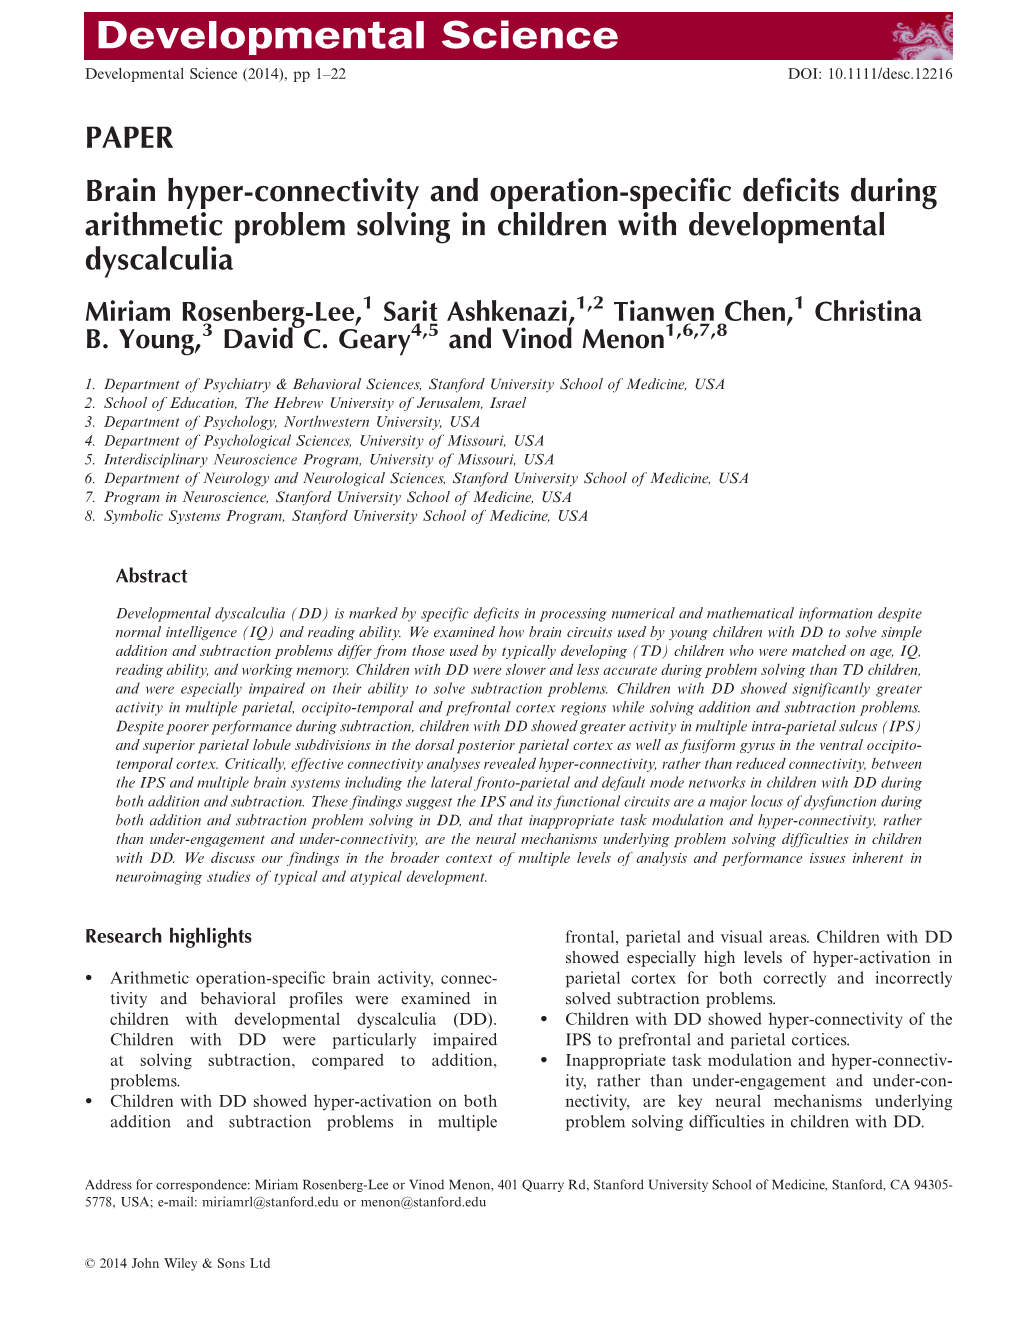 Brain Hyperconnectivity and Operationspecific Deficits During